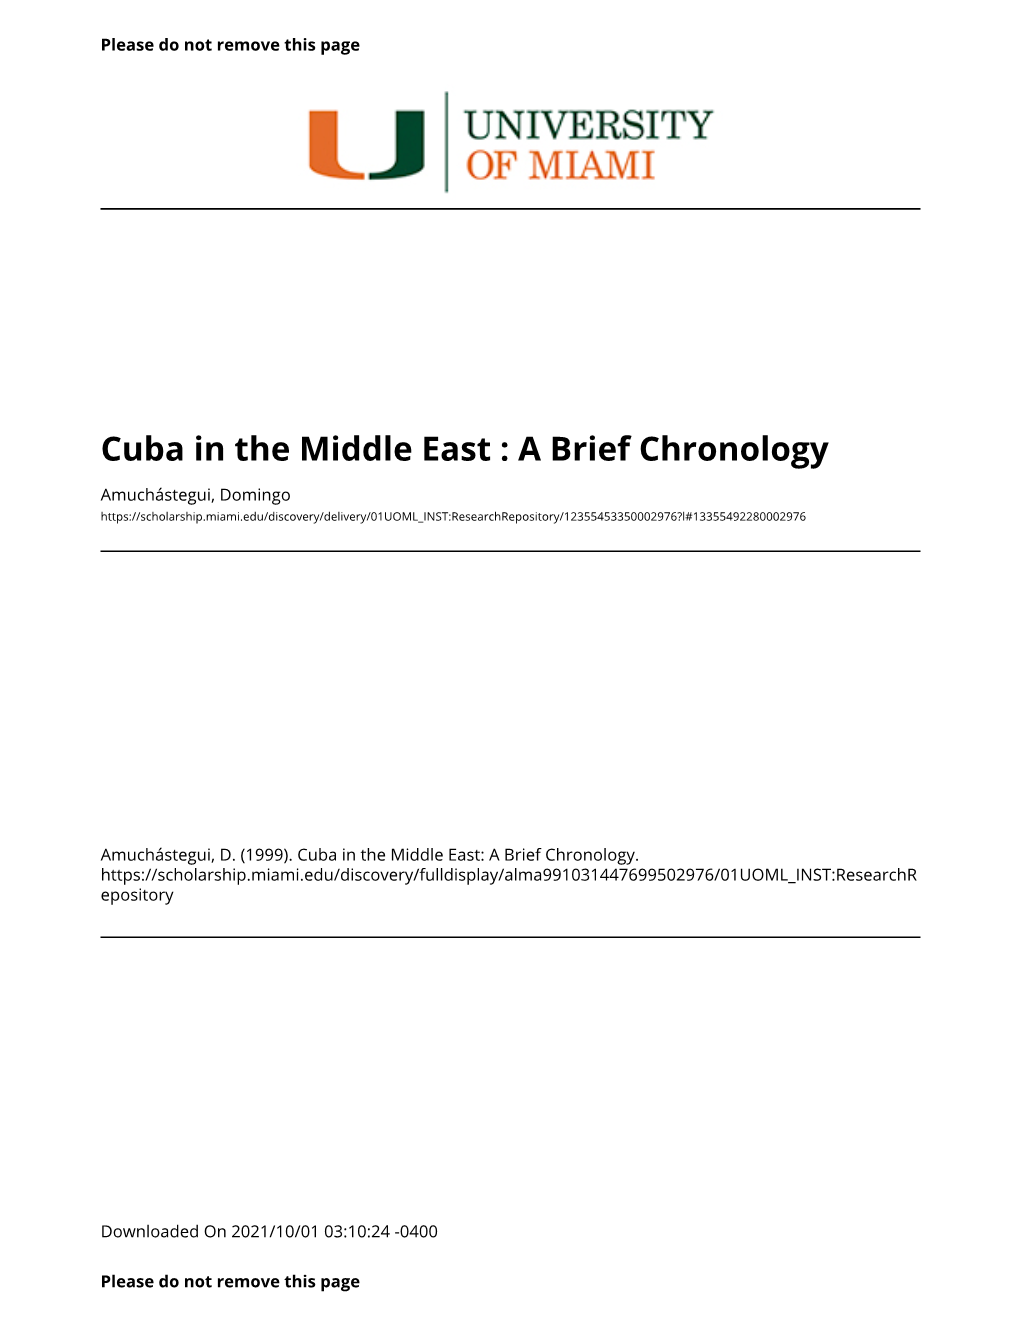 Cuba in the Middle East : a Brief Chronology